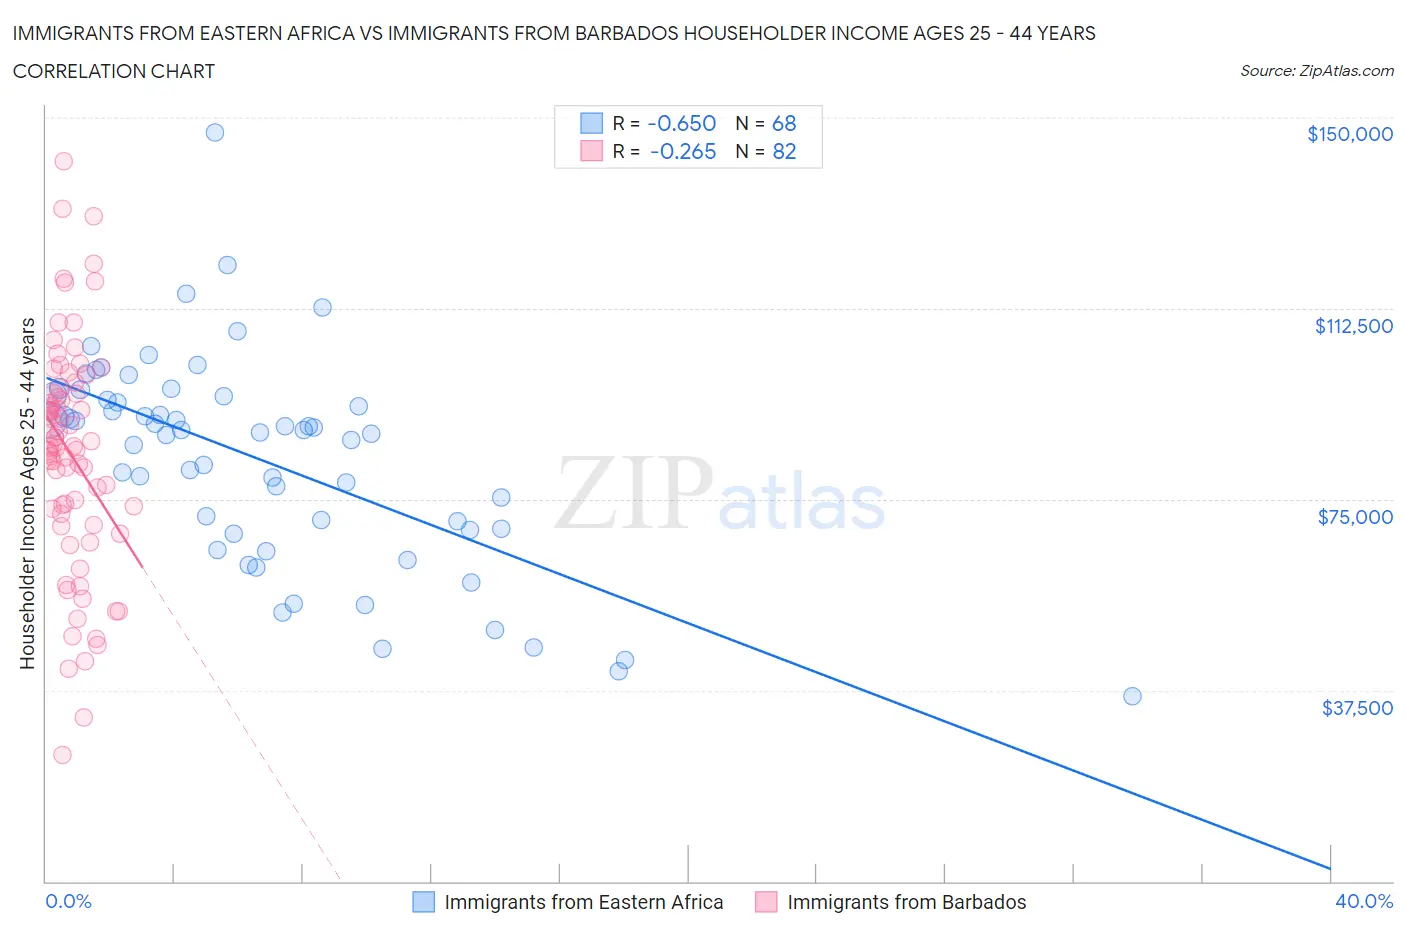 Immigrants from Eastern Africa vs Immigrants from Barbados Householder Income Ages 25 - 44 years